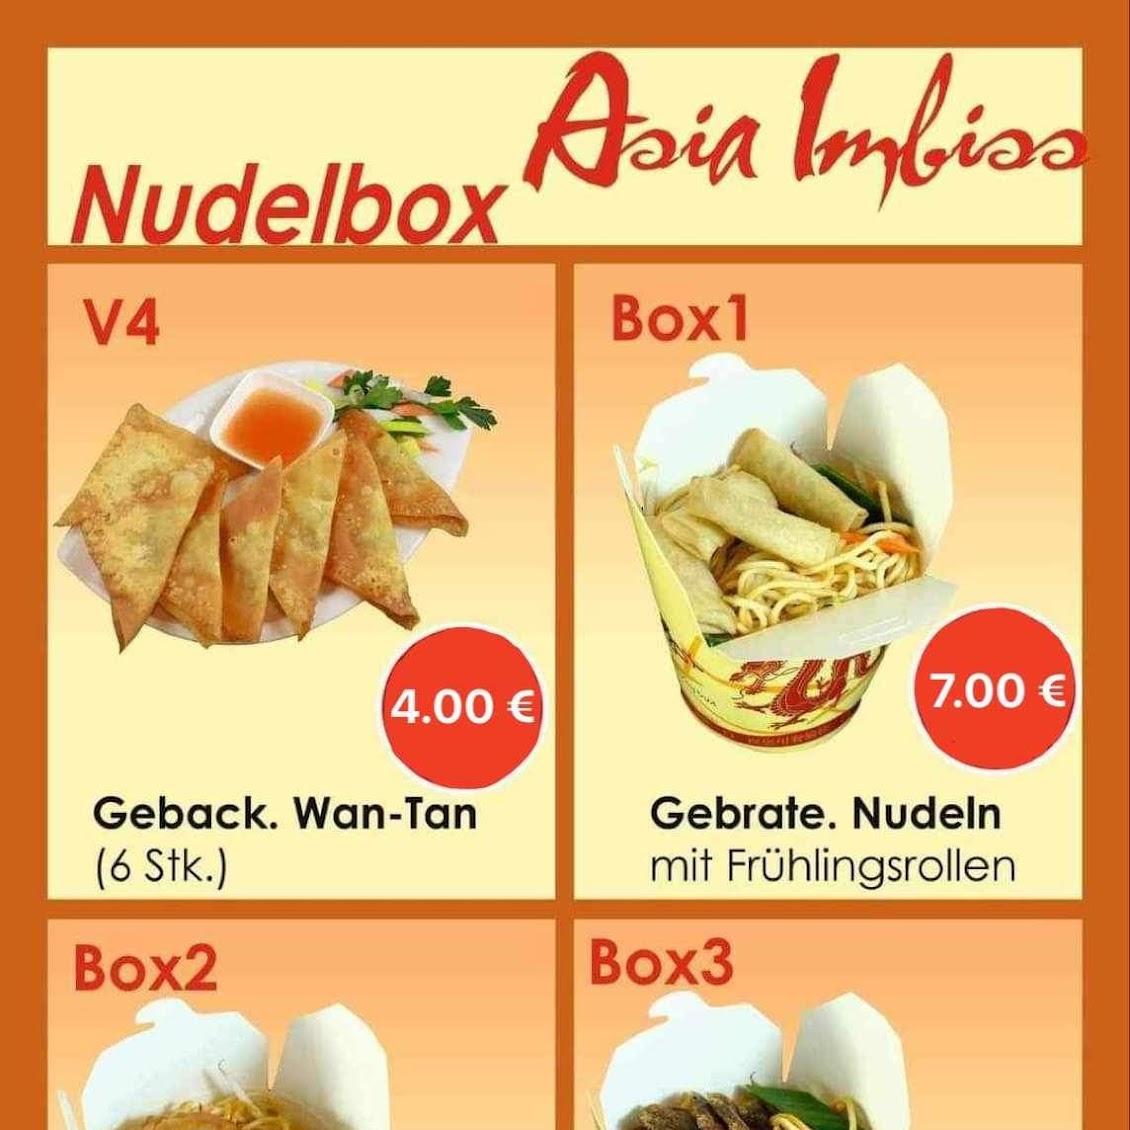 Restaurant "Asian imbiss" in Walsrode